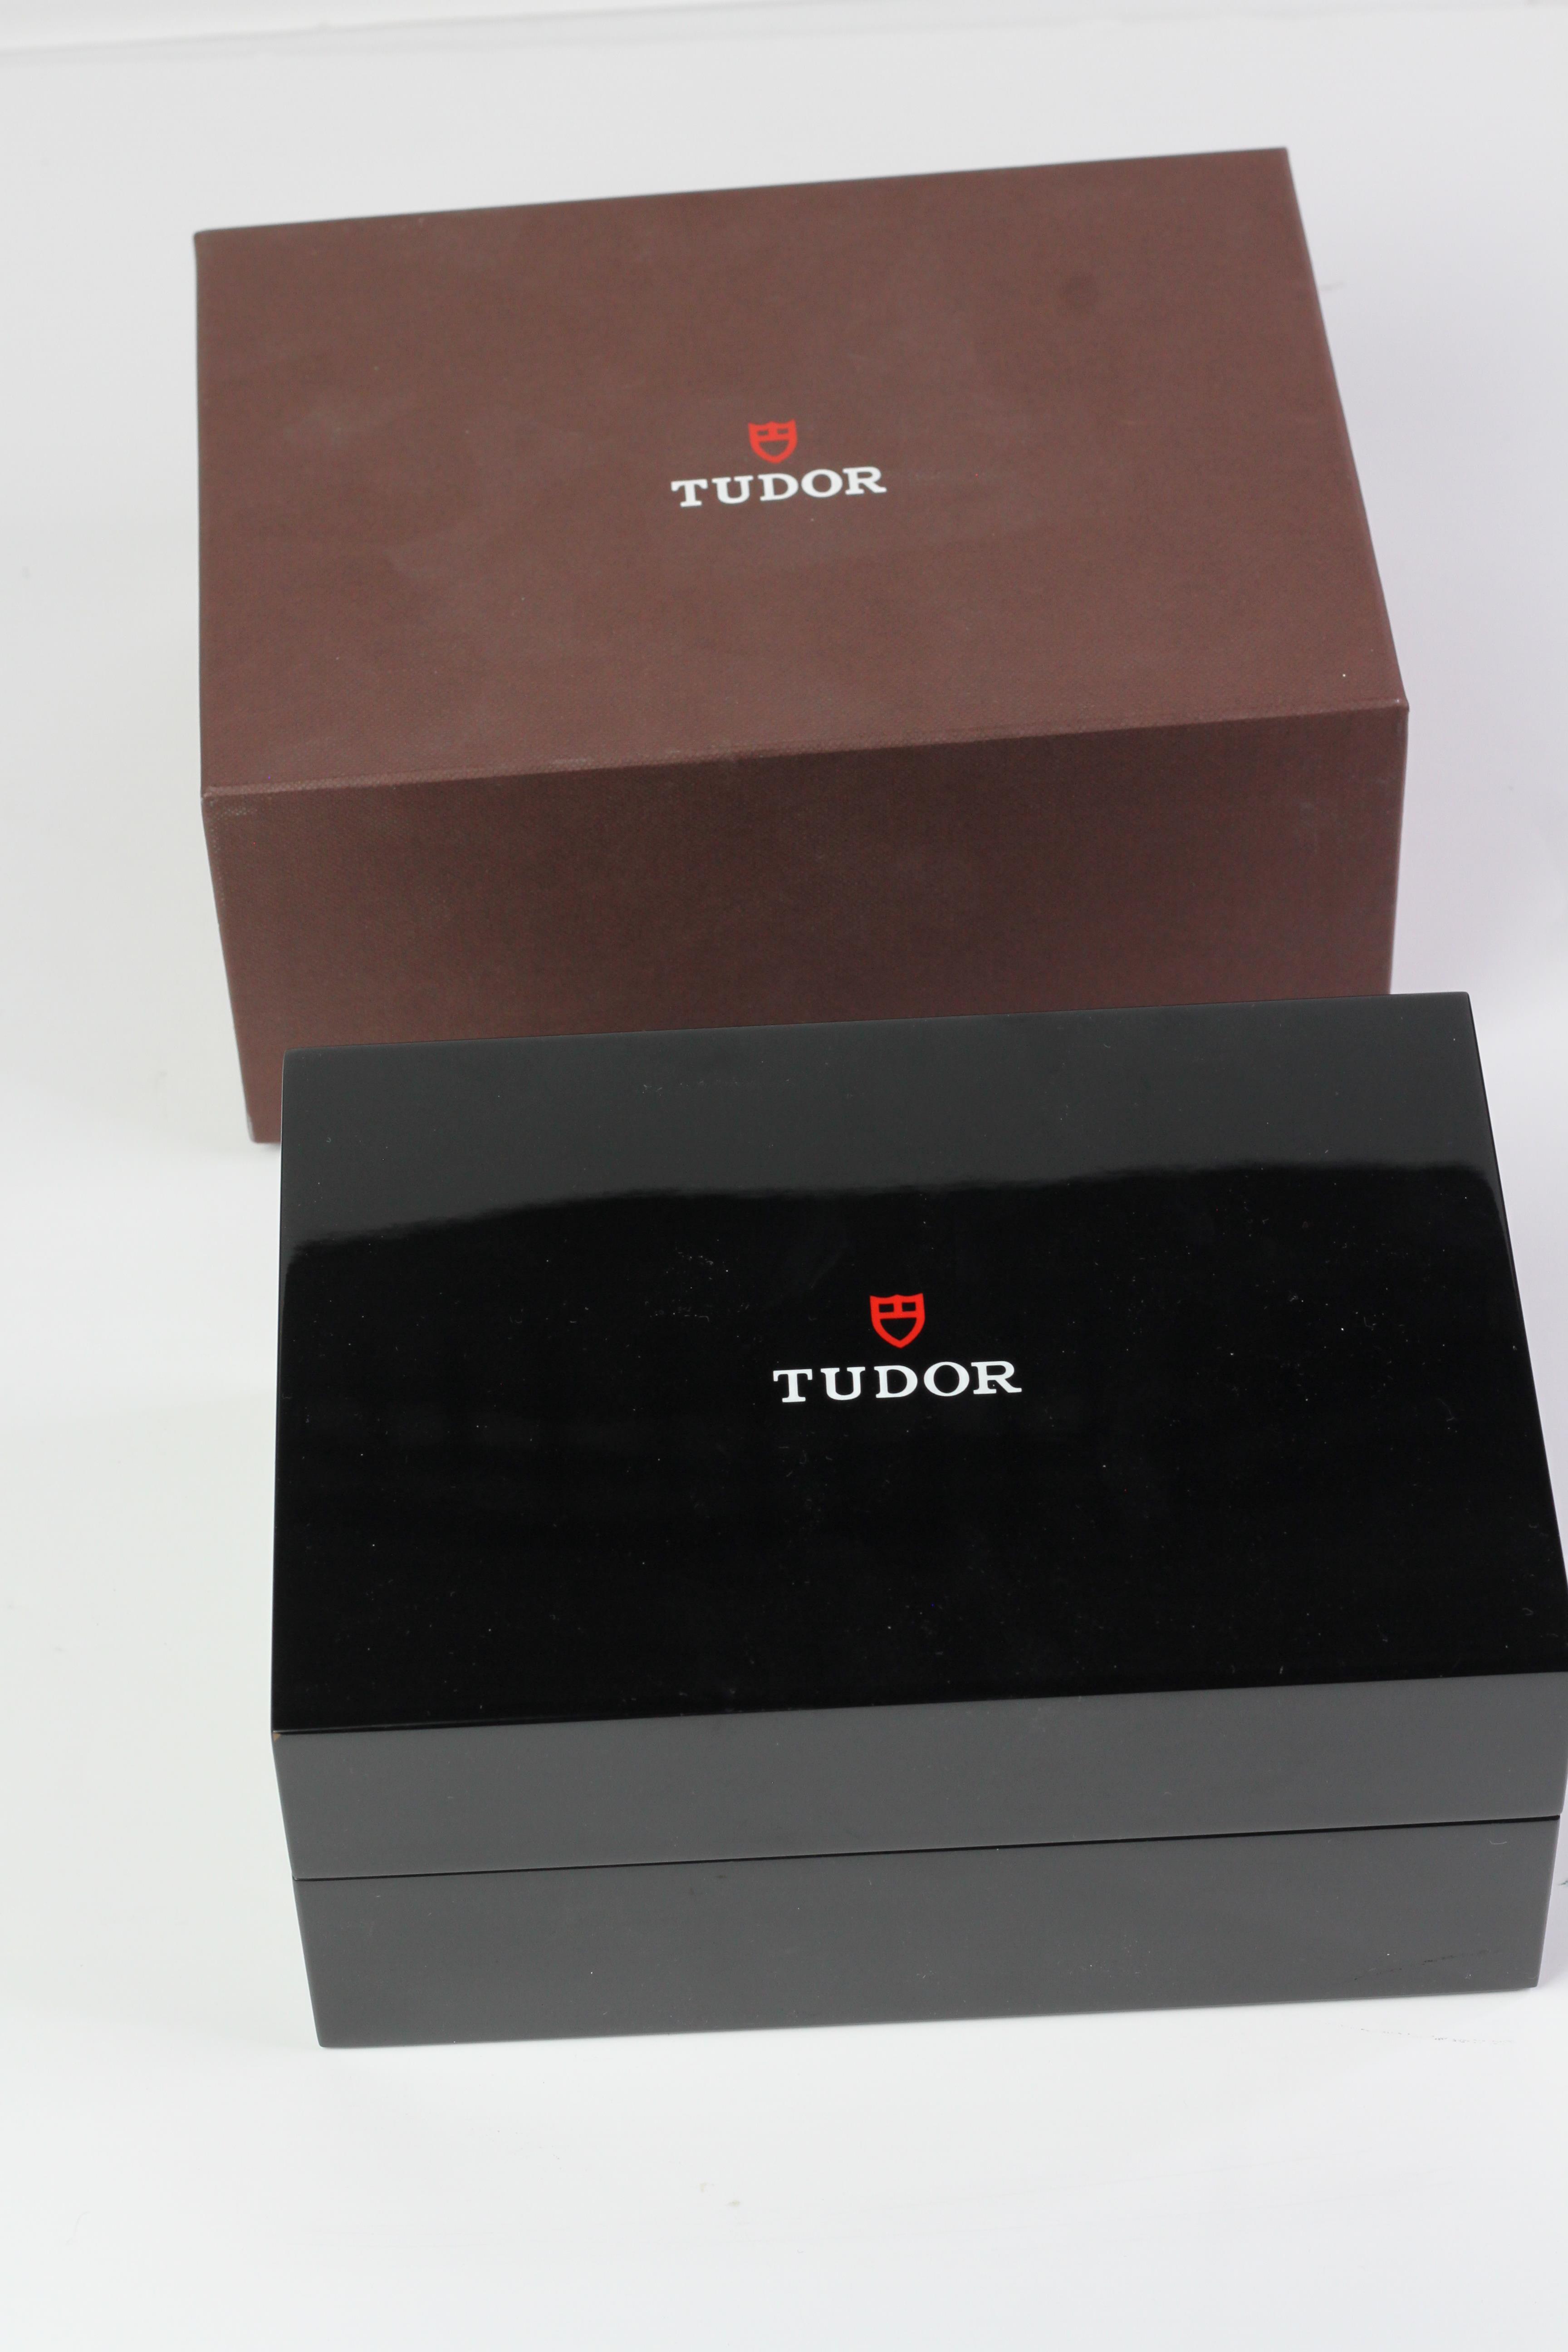 *To Be Sold Without Reserve" Modern Tudor inner and outer box - Image 2 of 3